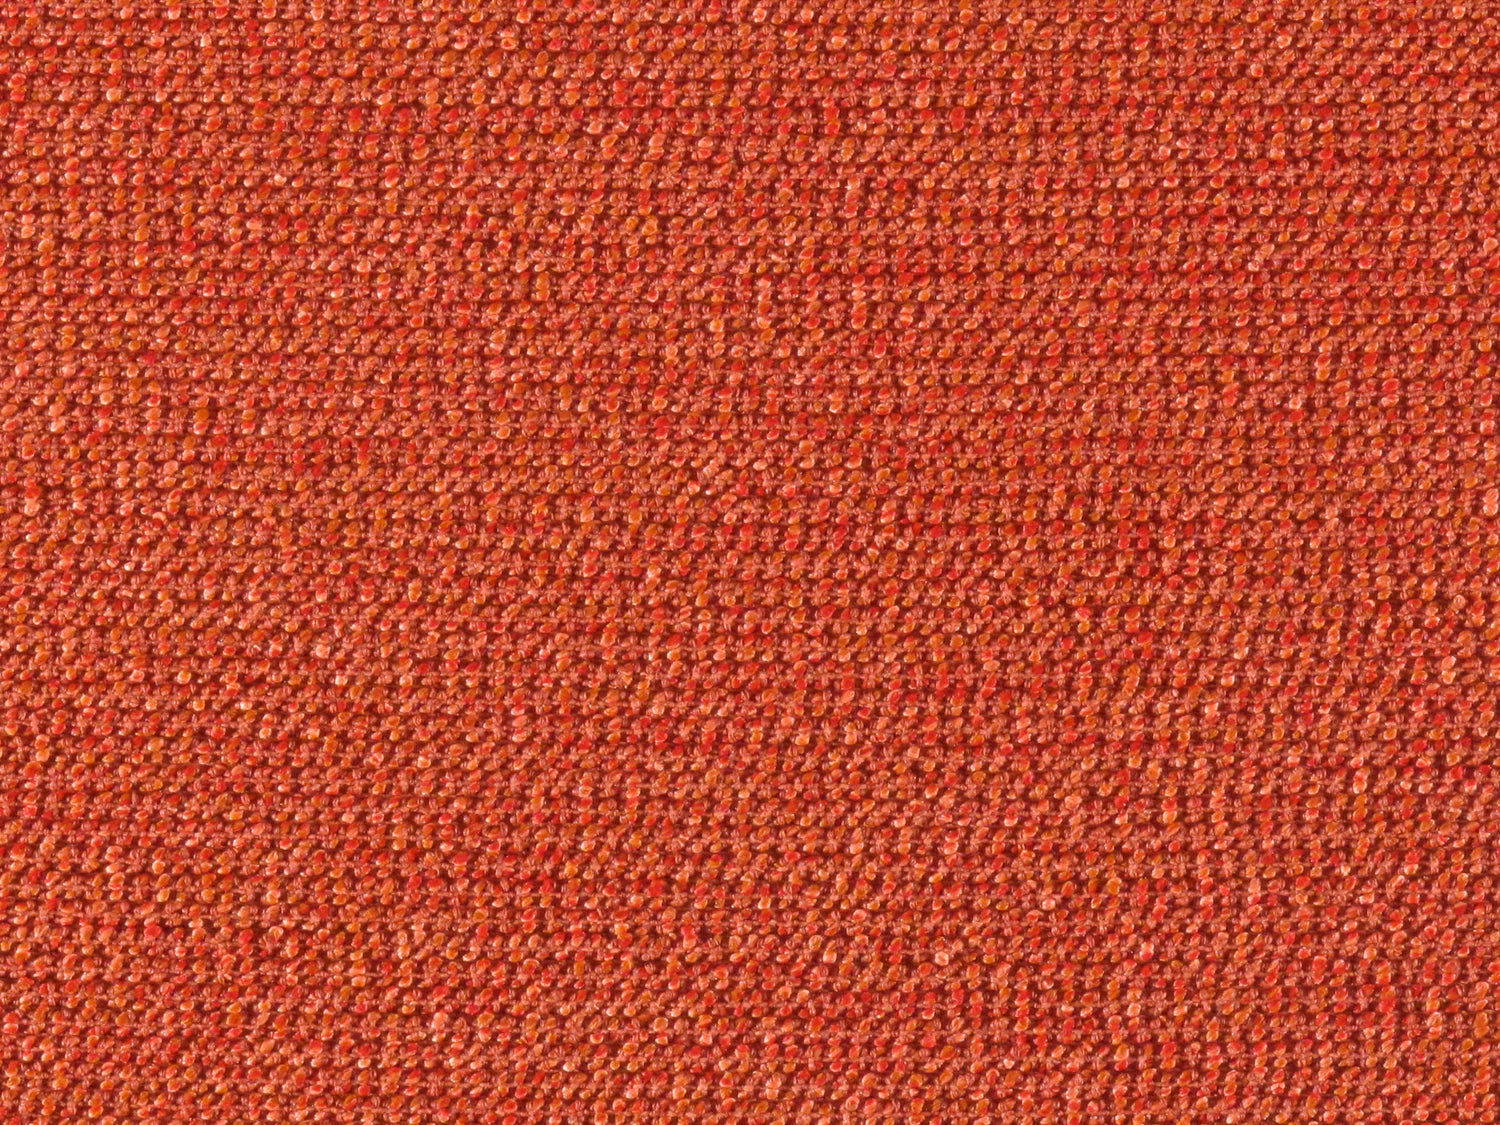 Welton fabric in coral color - pattern number WR 00032429 - by Scalamandre in the Old World Weavers collection